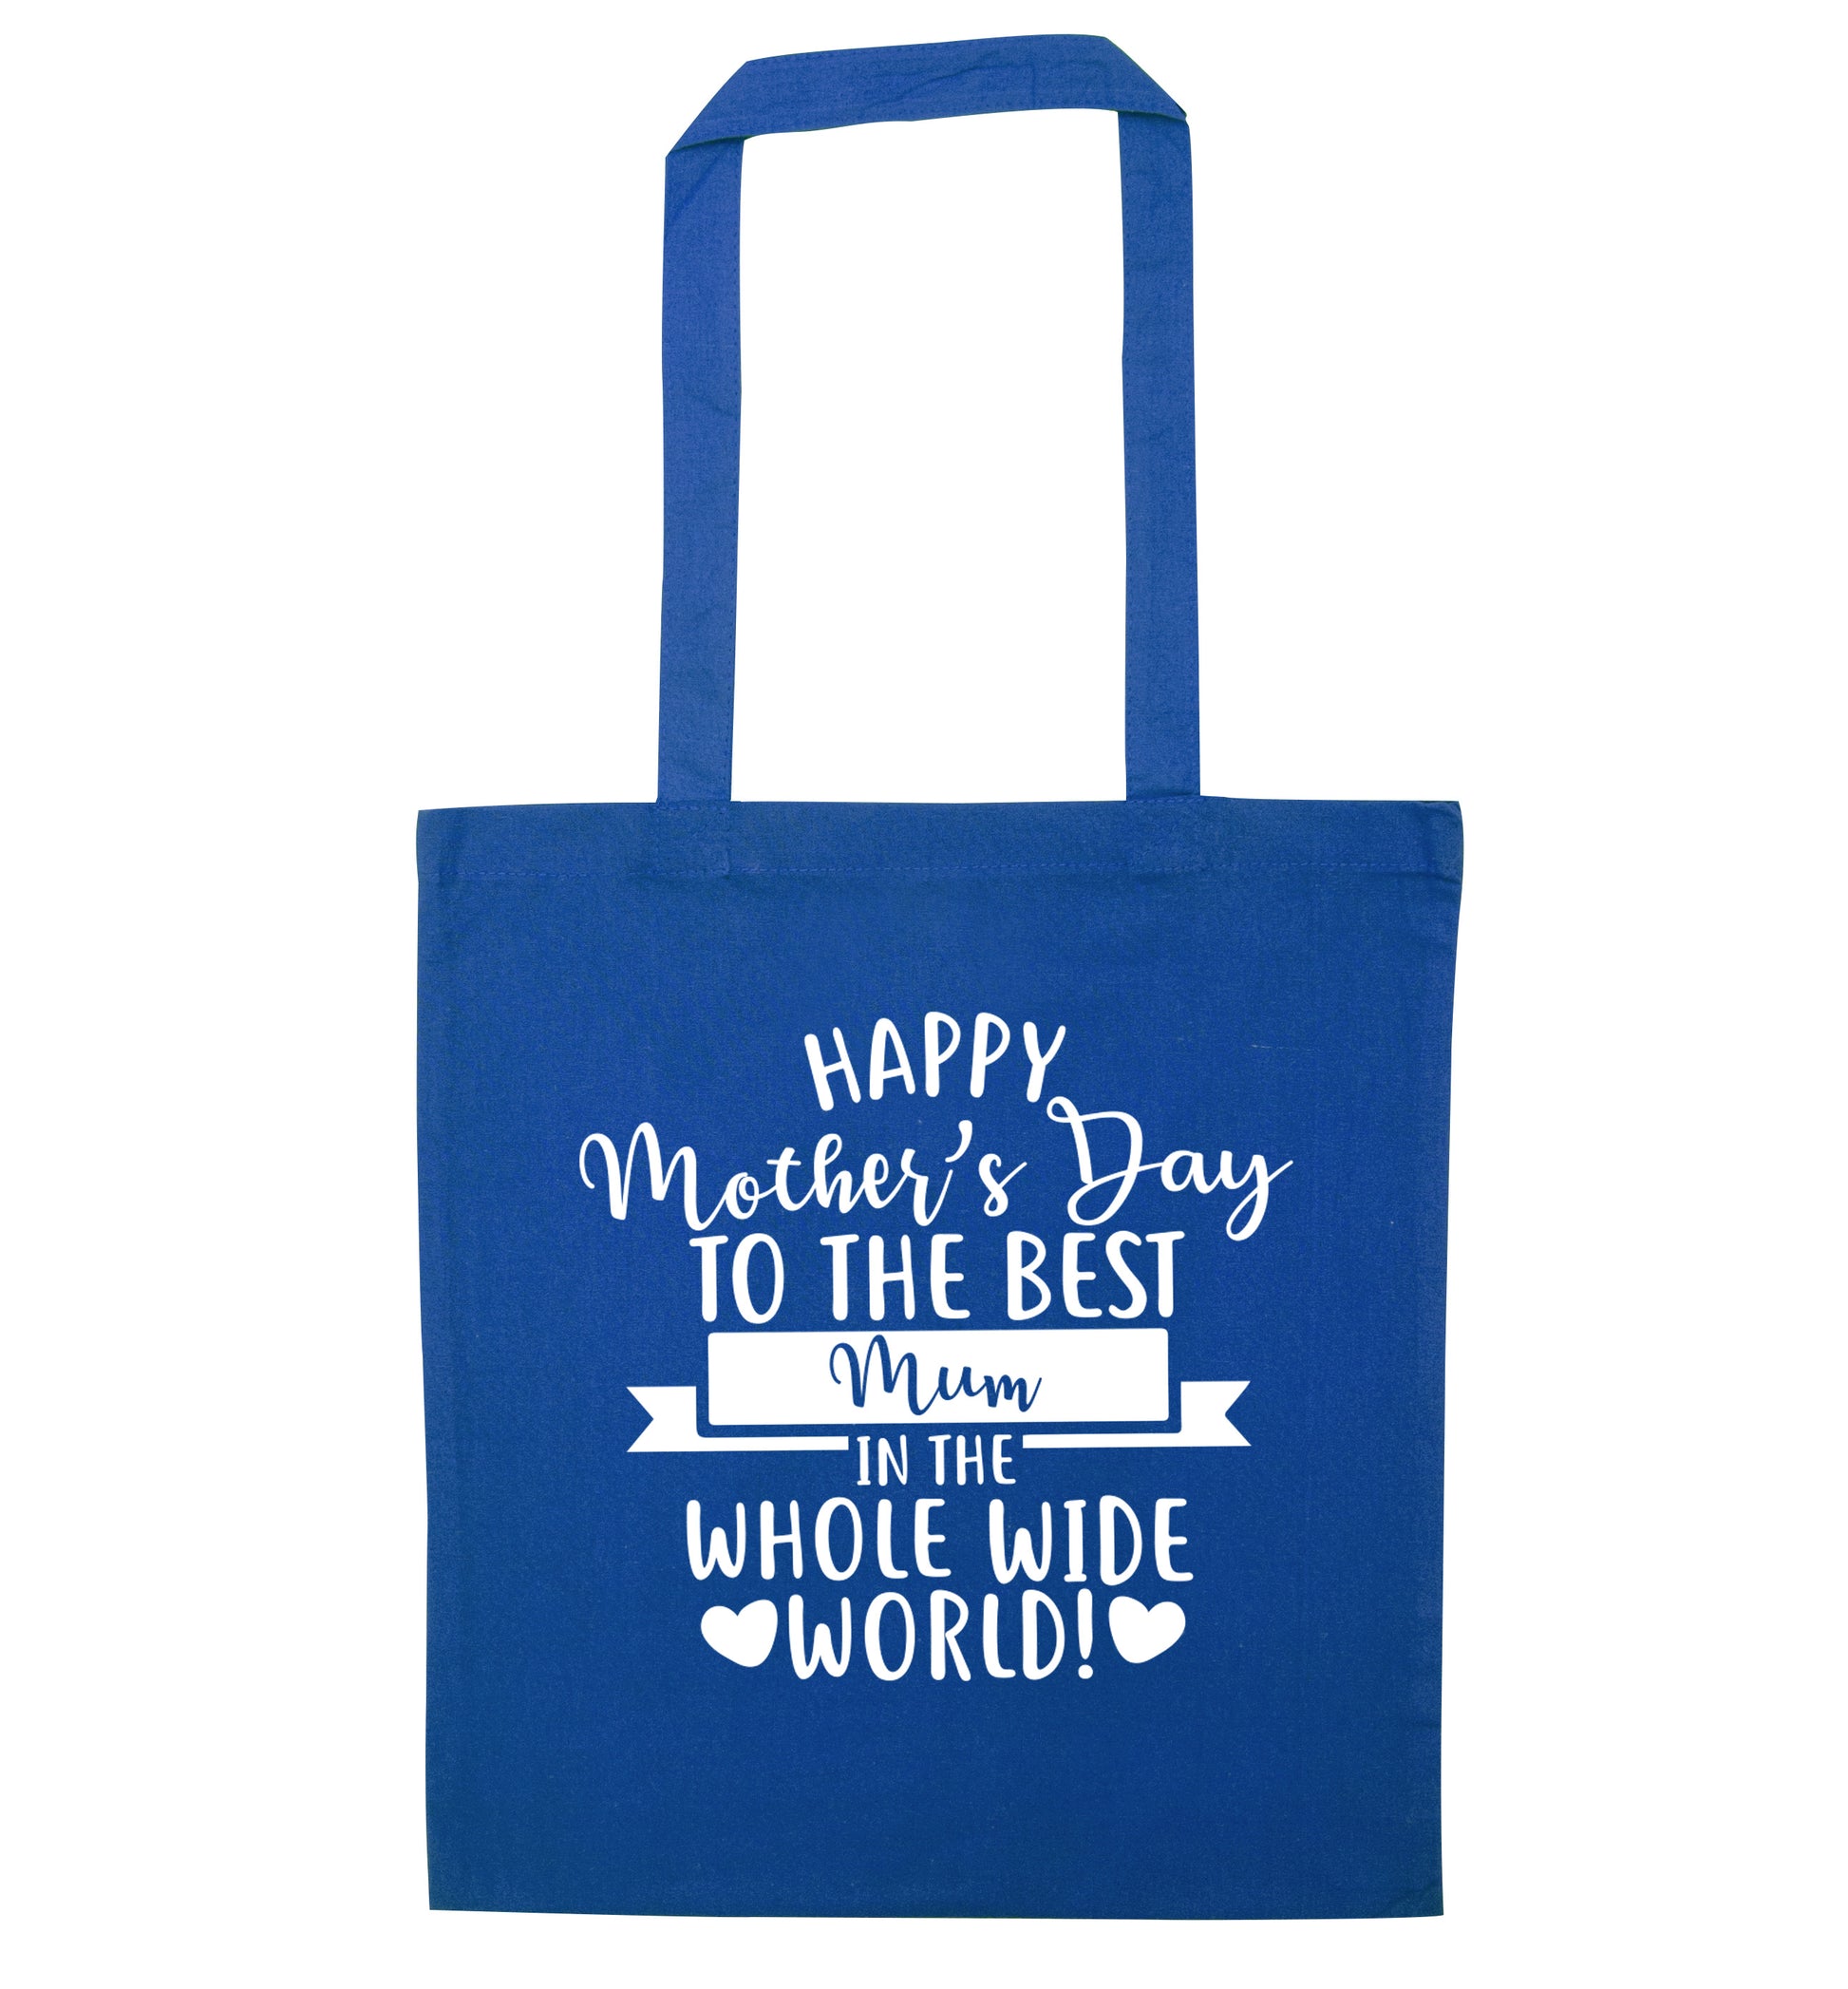 Happy Mother's Day to the best mum in the whole wide world! blue tote bag